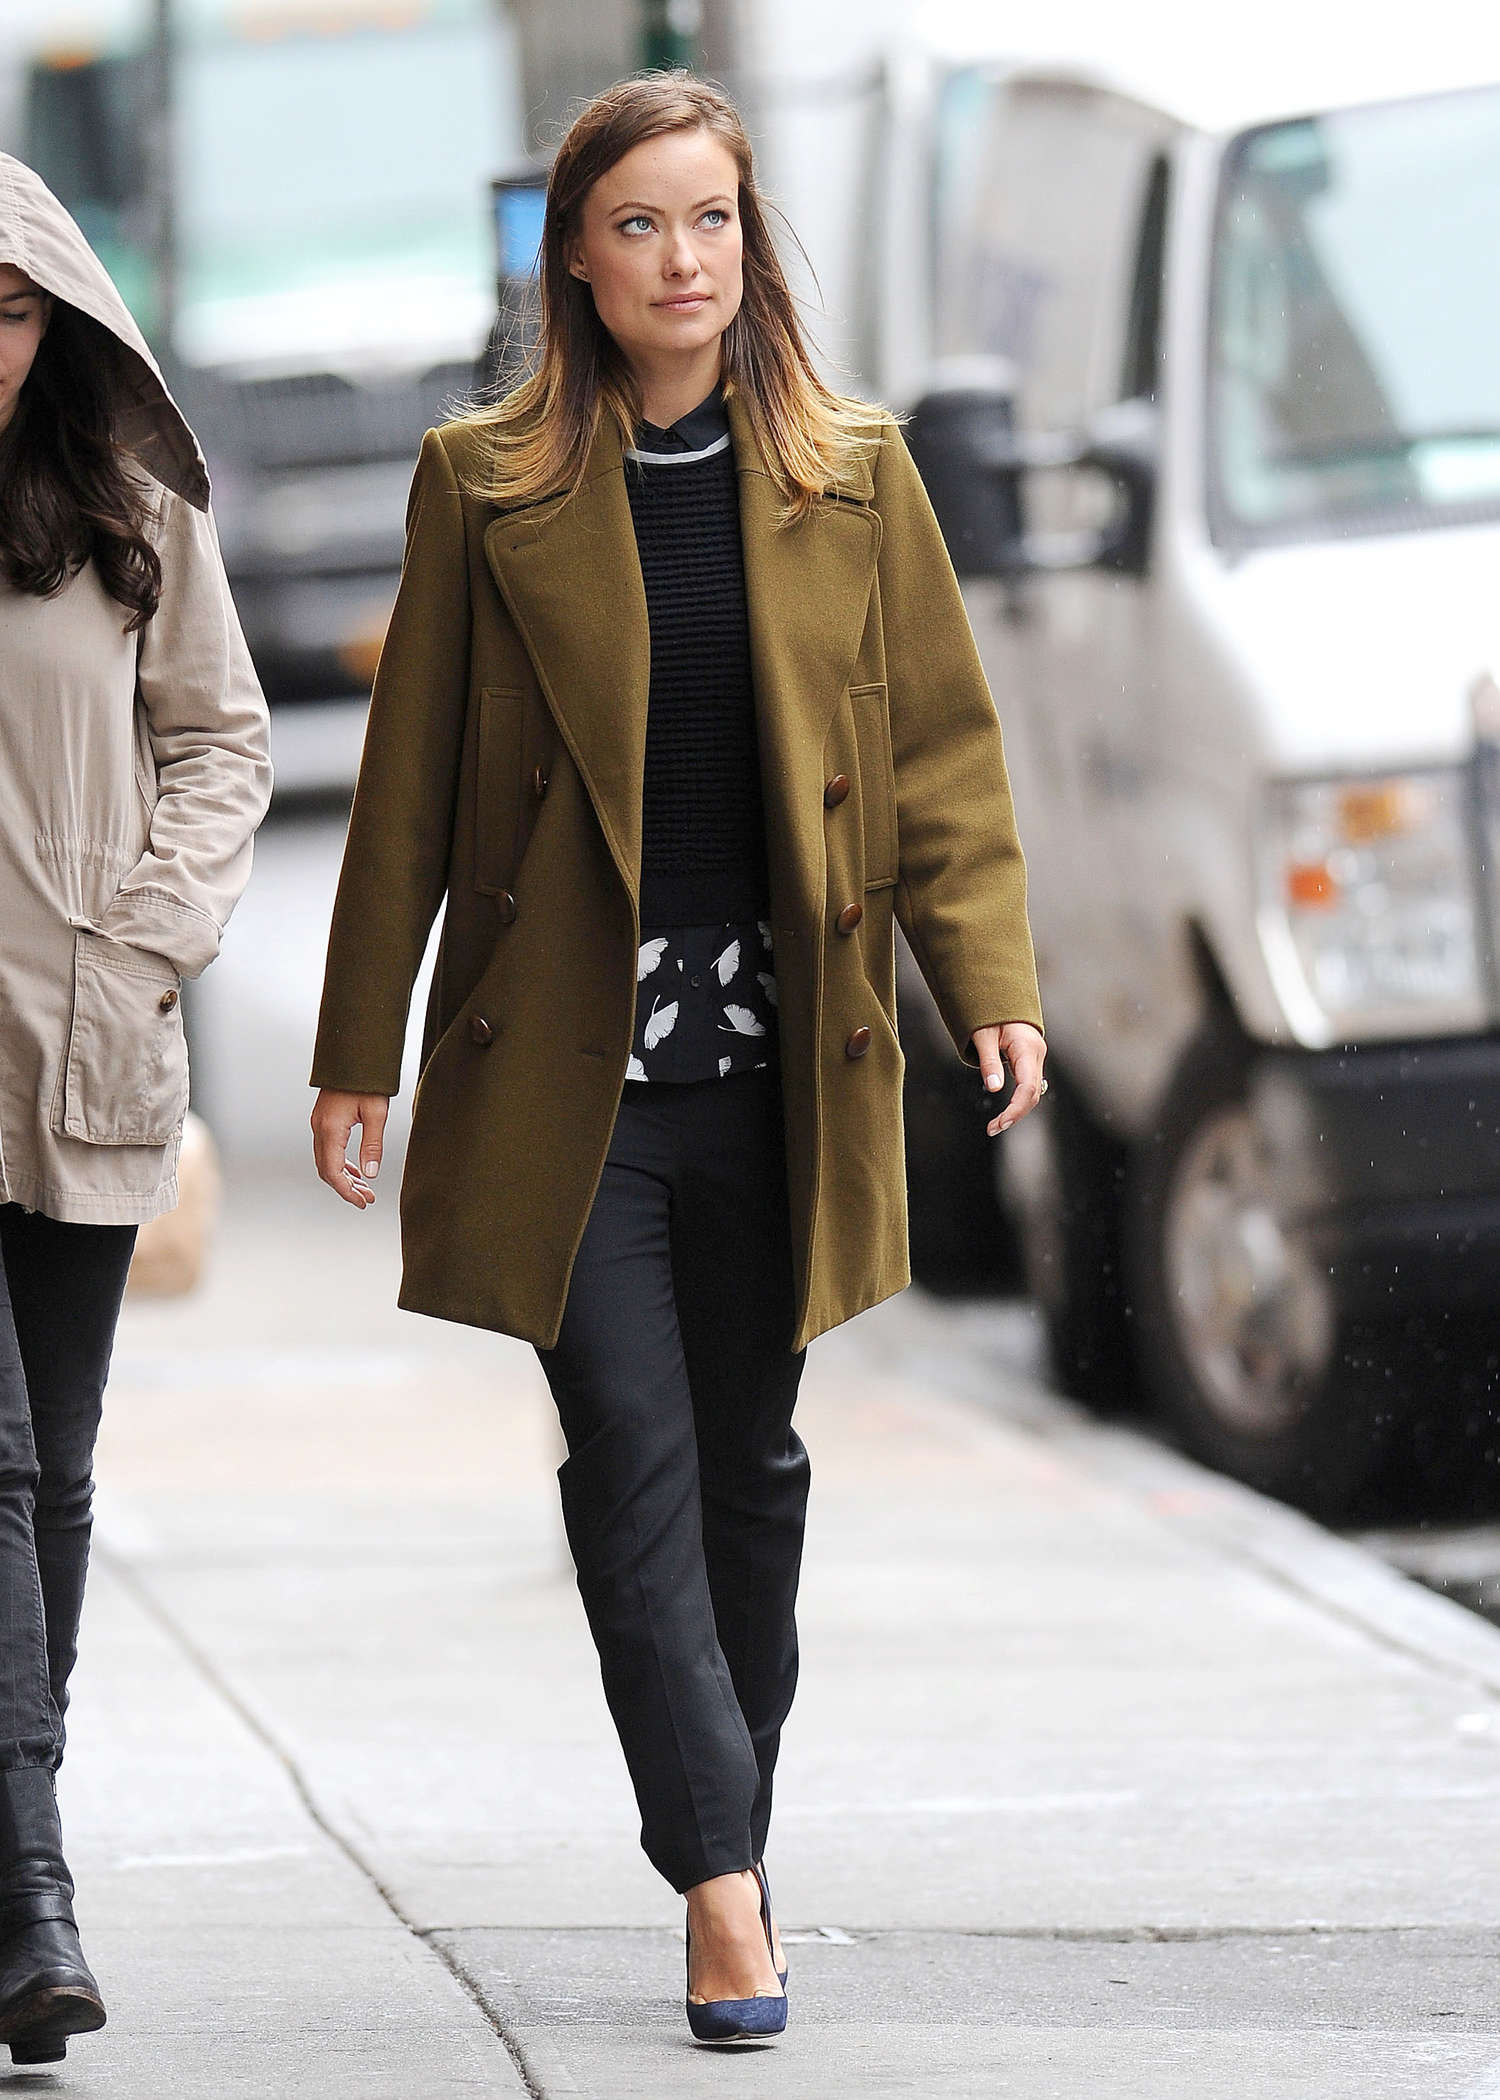 Olivia Wilde out and about in NY. 